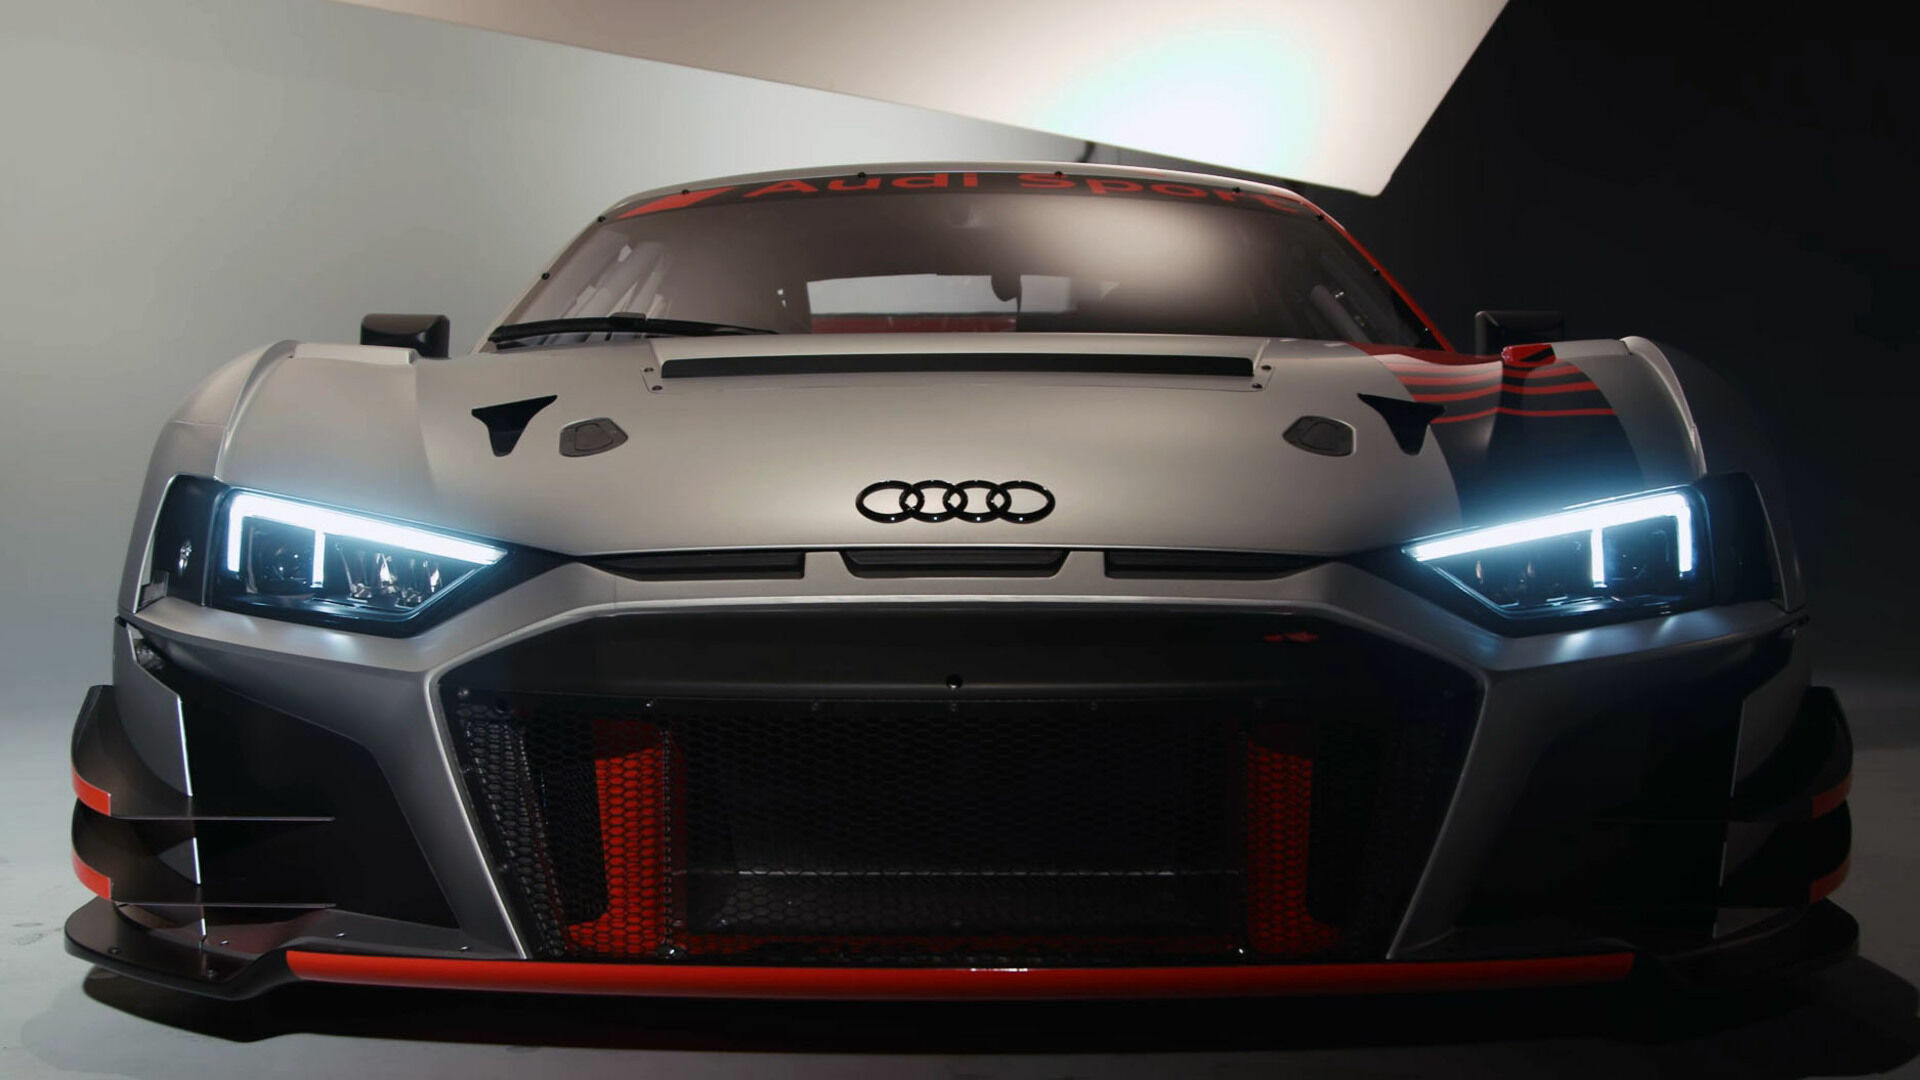 The new evolution of the Audi R8 LMS